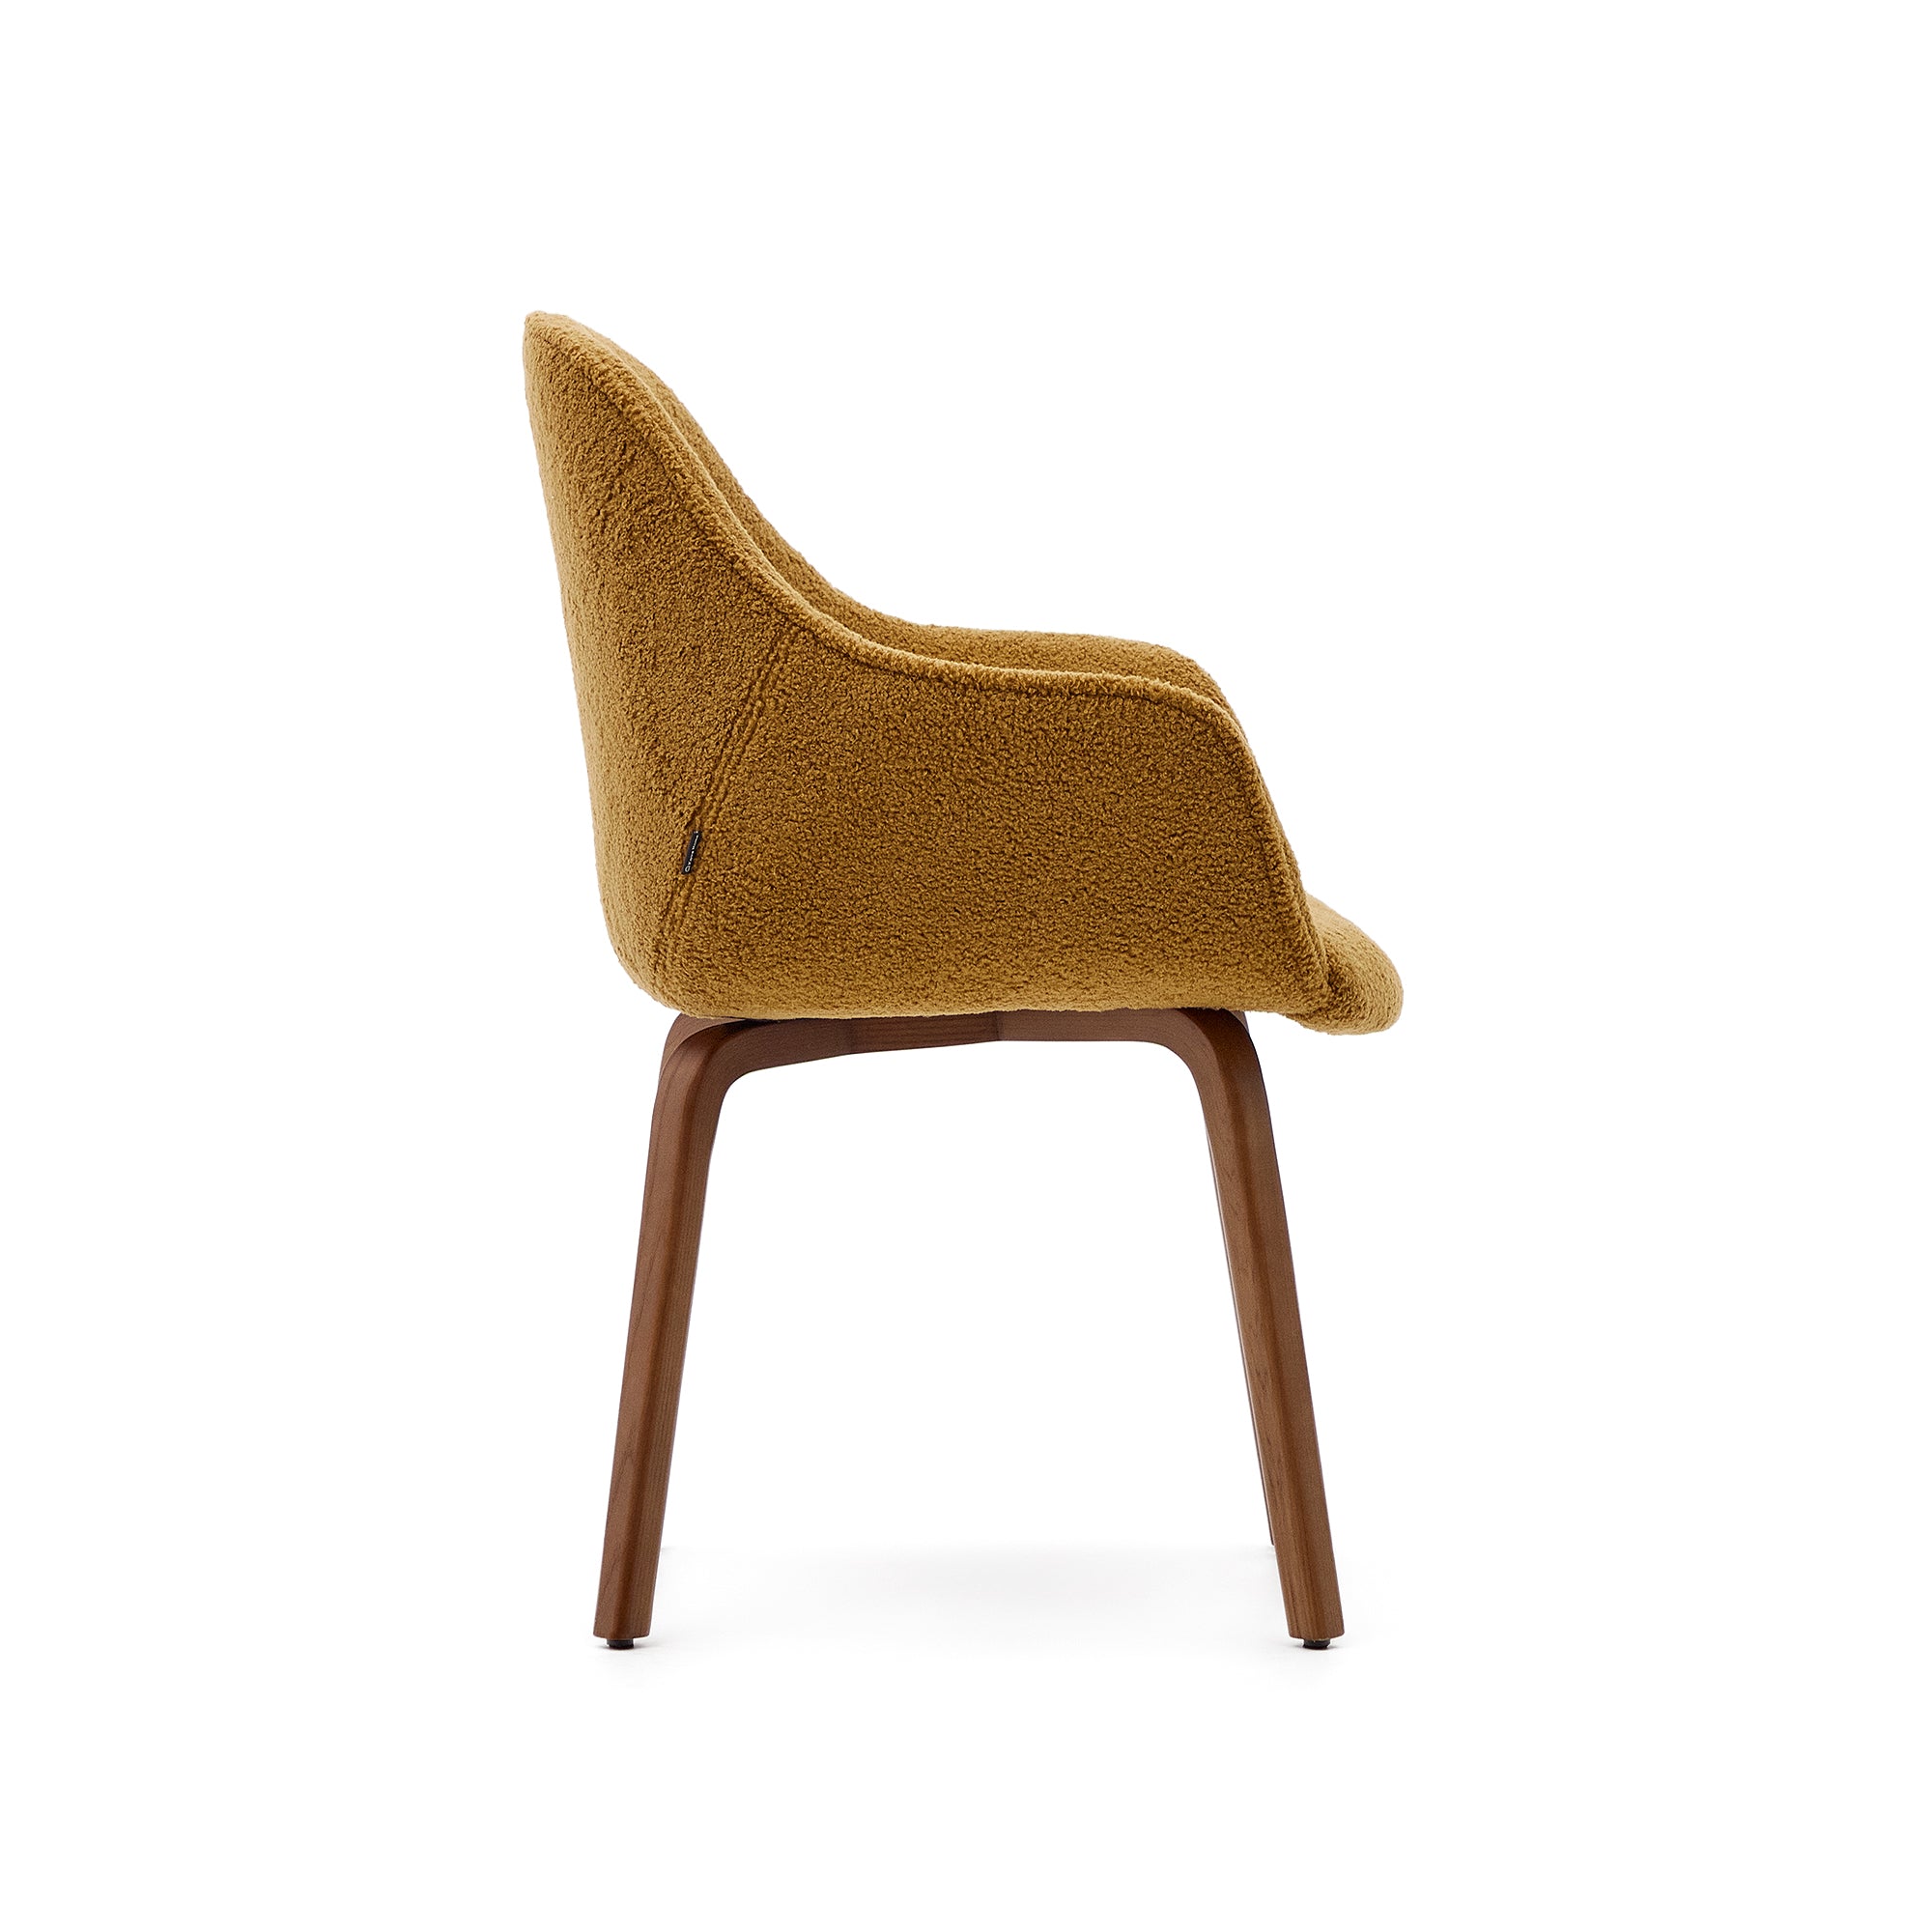 Aleli chair in mustard shearling with solid ash wood legs and walnut finish